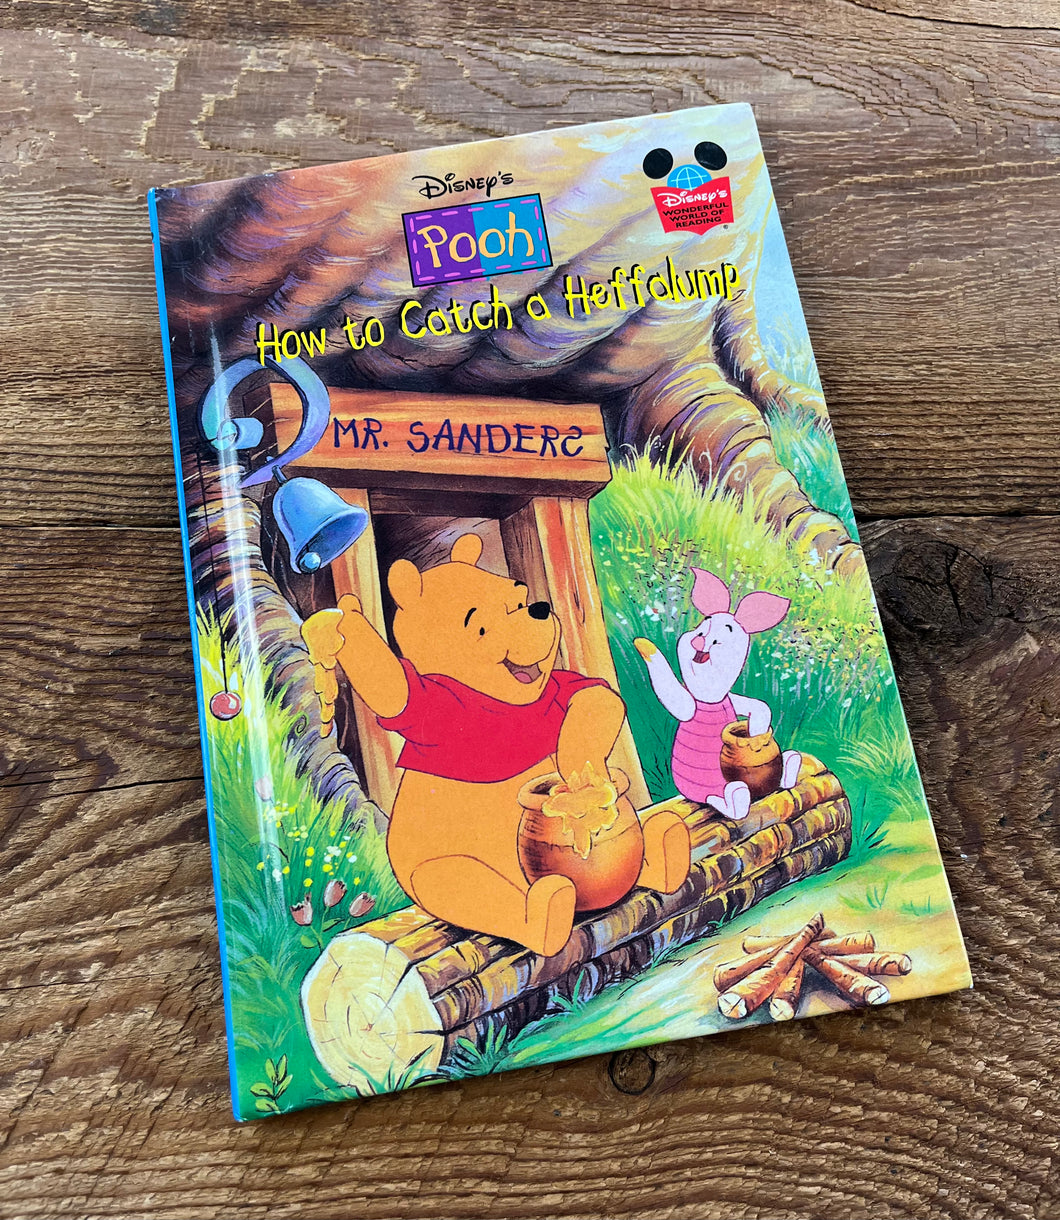 Pooh How to Catch a Heffalump